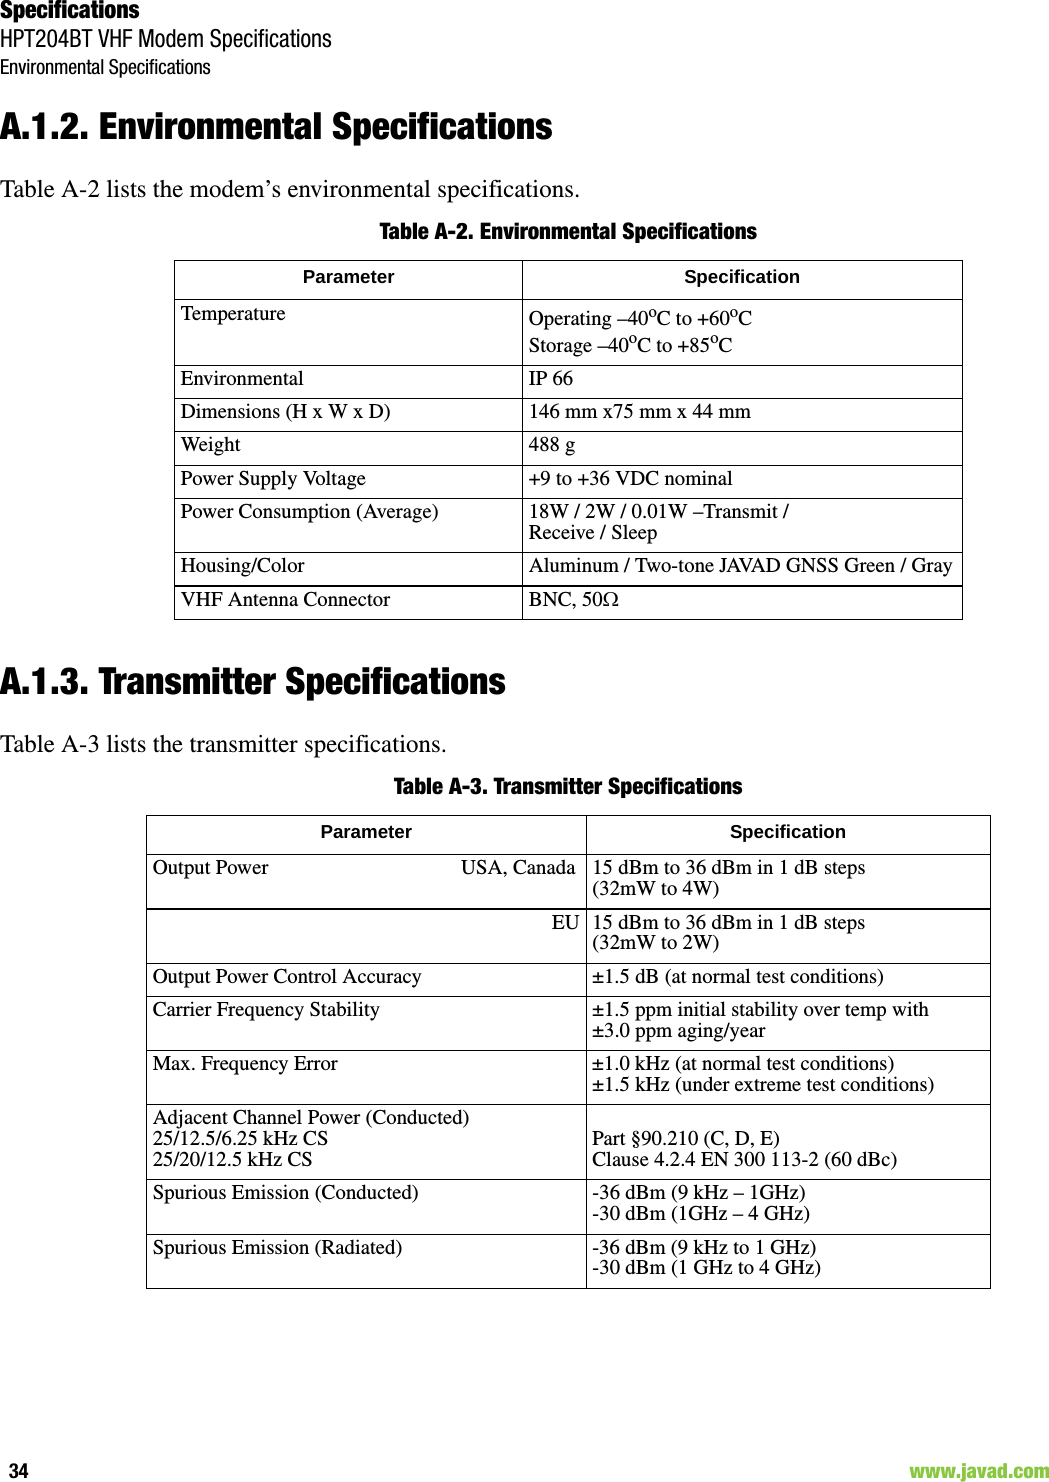 SpecificationsHPT204BT VHF Modem SpecificationsEnvironmental Specifications34                                                                                                                     www.javad.comA.1.2. Environmental SpecificationsTable A-2 lists the modem’s environmental specifications.Table A-2. Environmental SpecificationsA.1.3. Transmitter SpecificationsTable A-3 lists the transmitter specifications.Table A-3. Transmitter SpecificationsParameter SpecificationTemperature Operating –40oC to +60oCStorage –40oC to +85oCEnvironmental IP 66Dimensions (H x W x D) 146 mm x75 mm x 44 mmWeight 488 gPower Supply Voltage +9 to +36 VDC nominalPower Consumption (Average) 18W / 2W / 0.01W –Transmit / Receive / Sleep Housing/Color Aluminum / Two-tone JAVAD GNSS Green / GrayVHF Antenna Connector BNC, 50Parameter SpecificationOutput Power                                     USA, Canada 15 dBm to 36 dBm in 1 dB steps(32mW to 4W)EU 15 dBm to 36 dBm in 1 dB steps(32mW to 2W)Output Power Control Accuracy ±1.5 dB (at normal test conditions)Carrier Frequency Stability ±1.5 ppm initial stability over temp with±3.0 ppm aging/yearMax. Frequency Error ±1.0 kHz (at normal test conditions)±1.5 kHz (under extreme test conditions)Adjacent Channel Power (Conducted)25/12.5/6.25 kHz CS         25/20/12.5 kHz CS Part §90.210 (C, D, E)Clause 4.2.4 EN 300 113-2 (60 dBc)Spurious Emission (Conducted) -36 dBm (9 kHz – 1GHz) -30 dBm (1GHz – 4 GHz)Spurious Emission (Radiated) -36 dBm (9 kHz to 1 GHz)-30 dBm (1 GHz to 4 GHz)